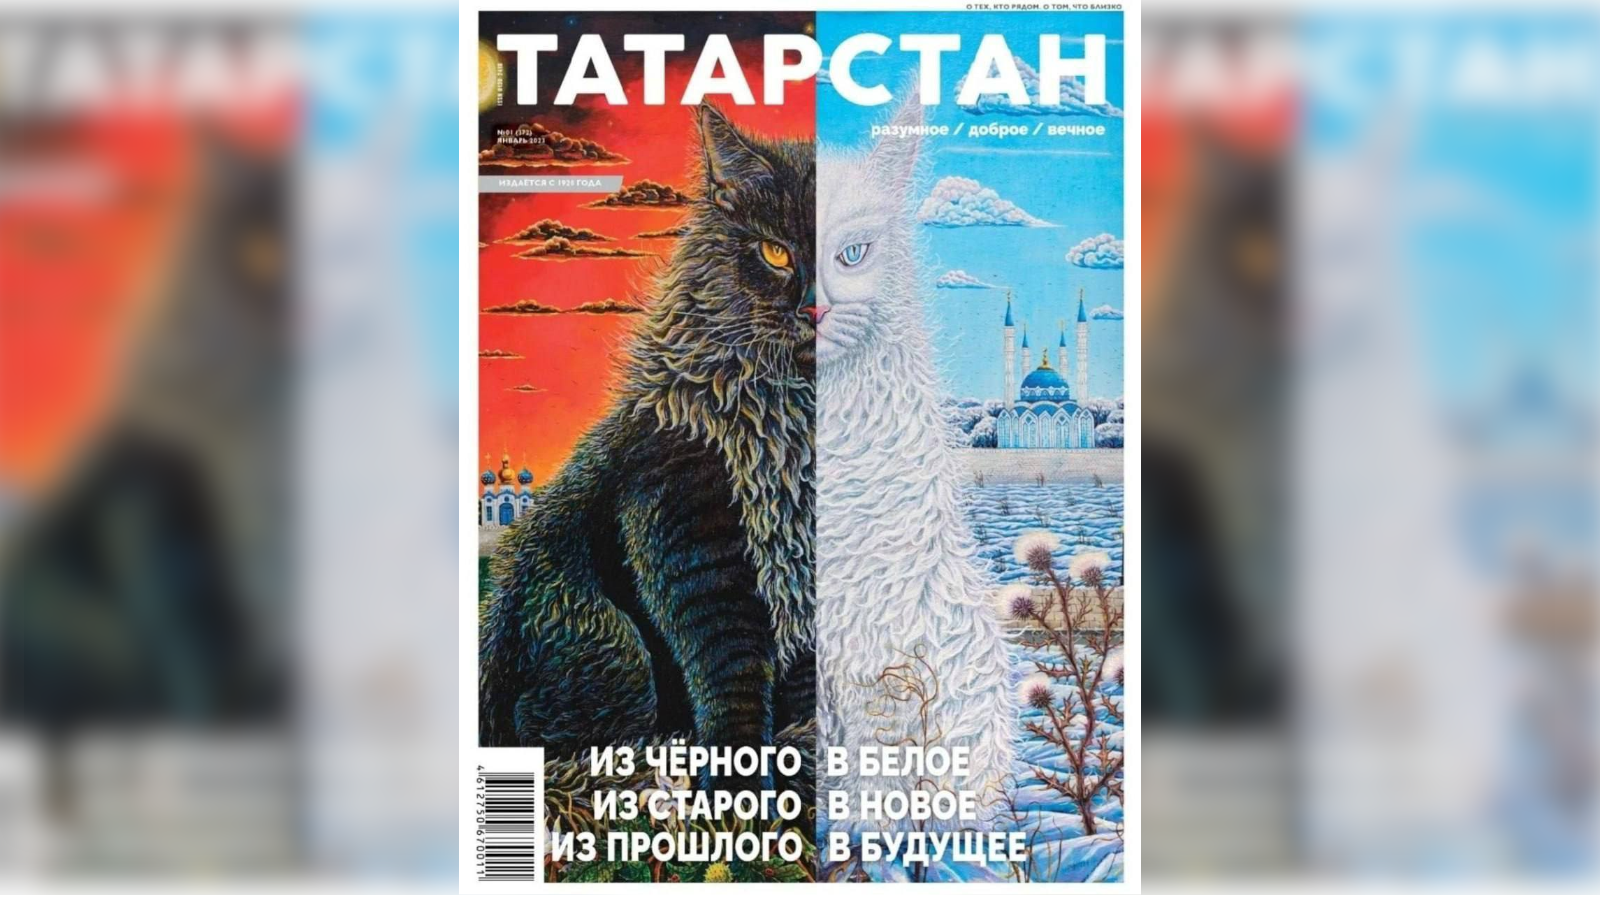 The story with Tatarstan magazine ended with a loud and demonstrative humiliation of the republic